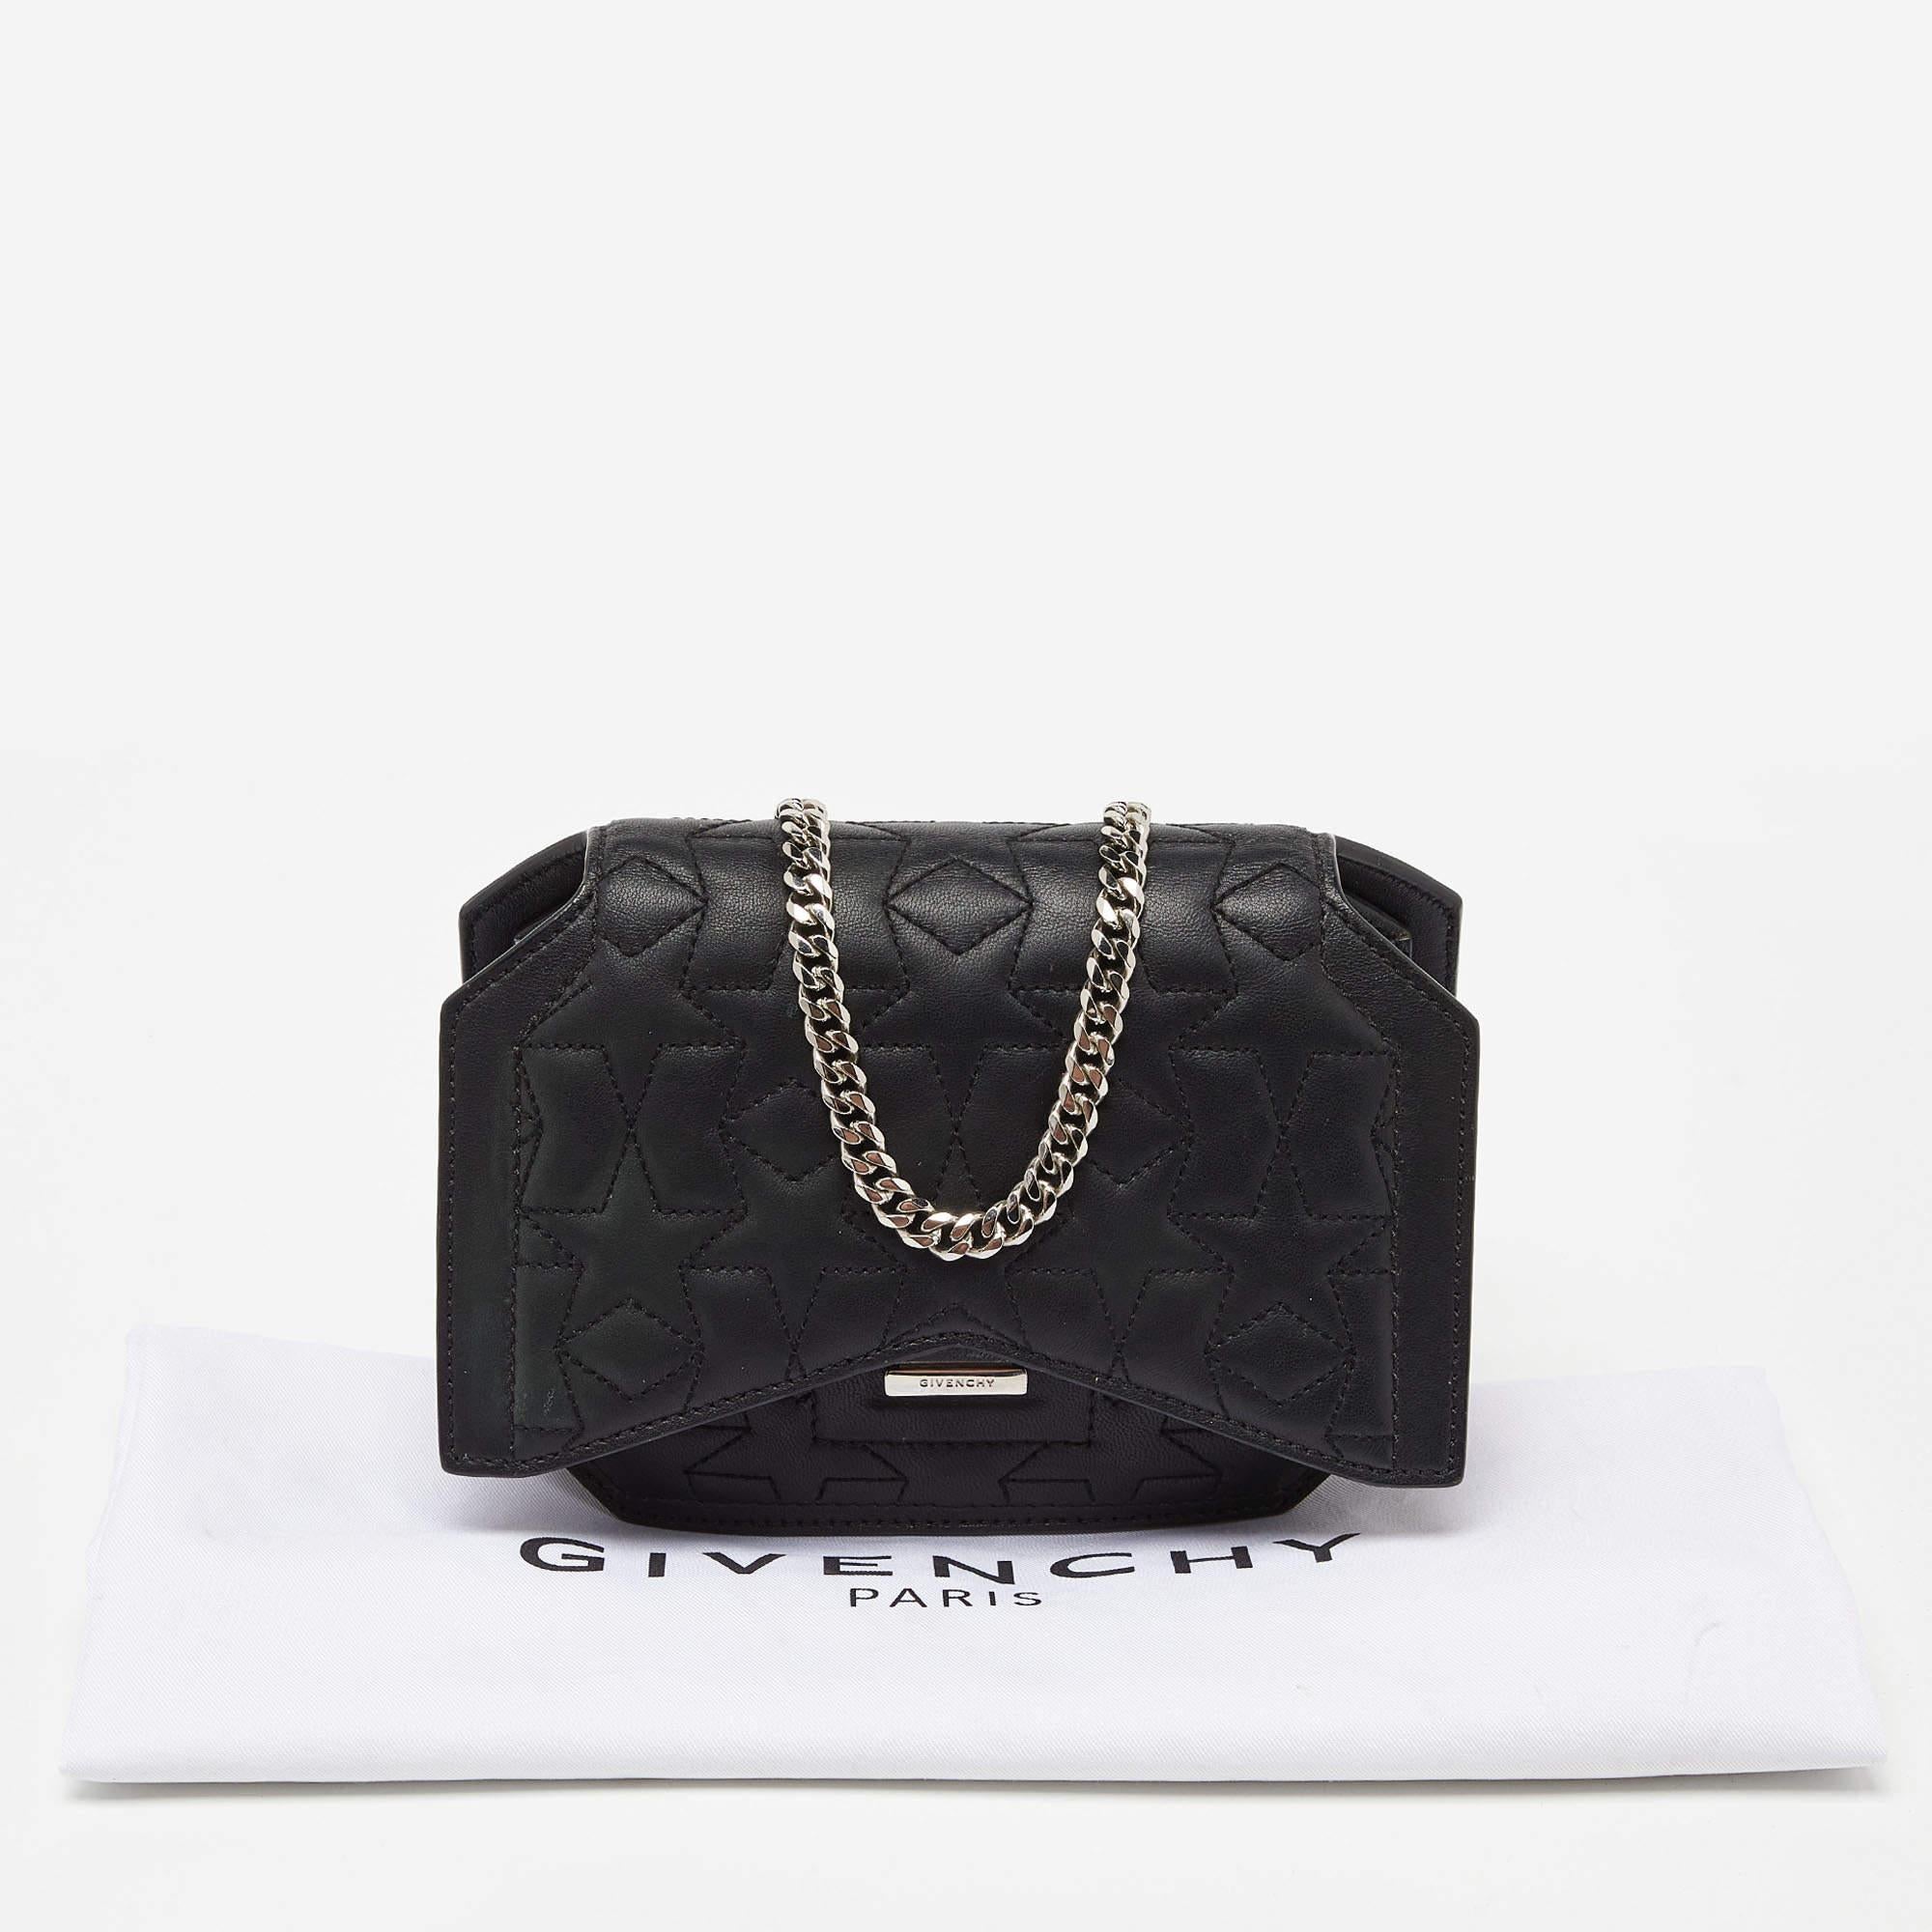 Givenchy Black Leather Bow Cut Flap Chain Bag 8